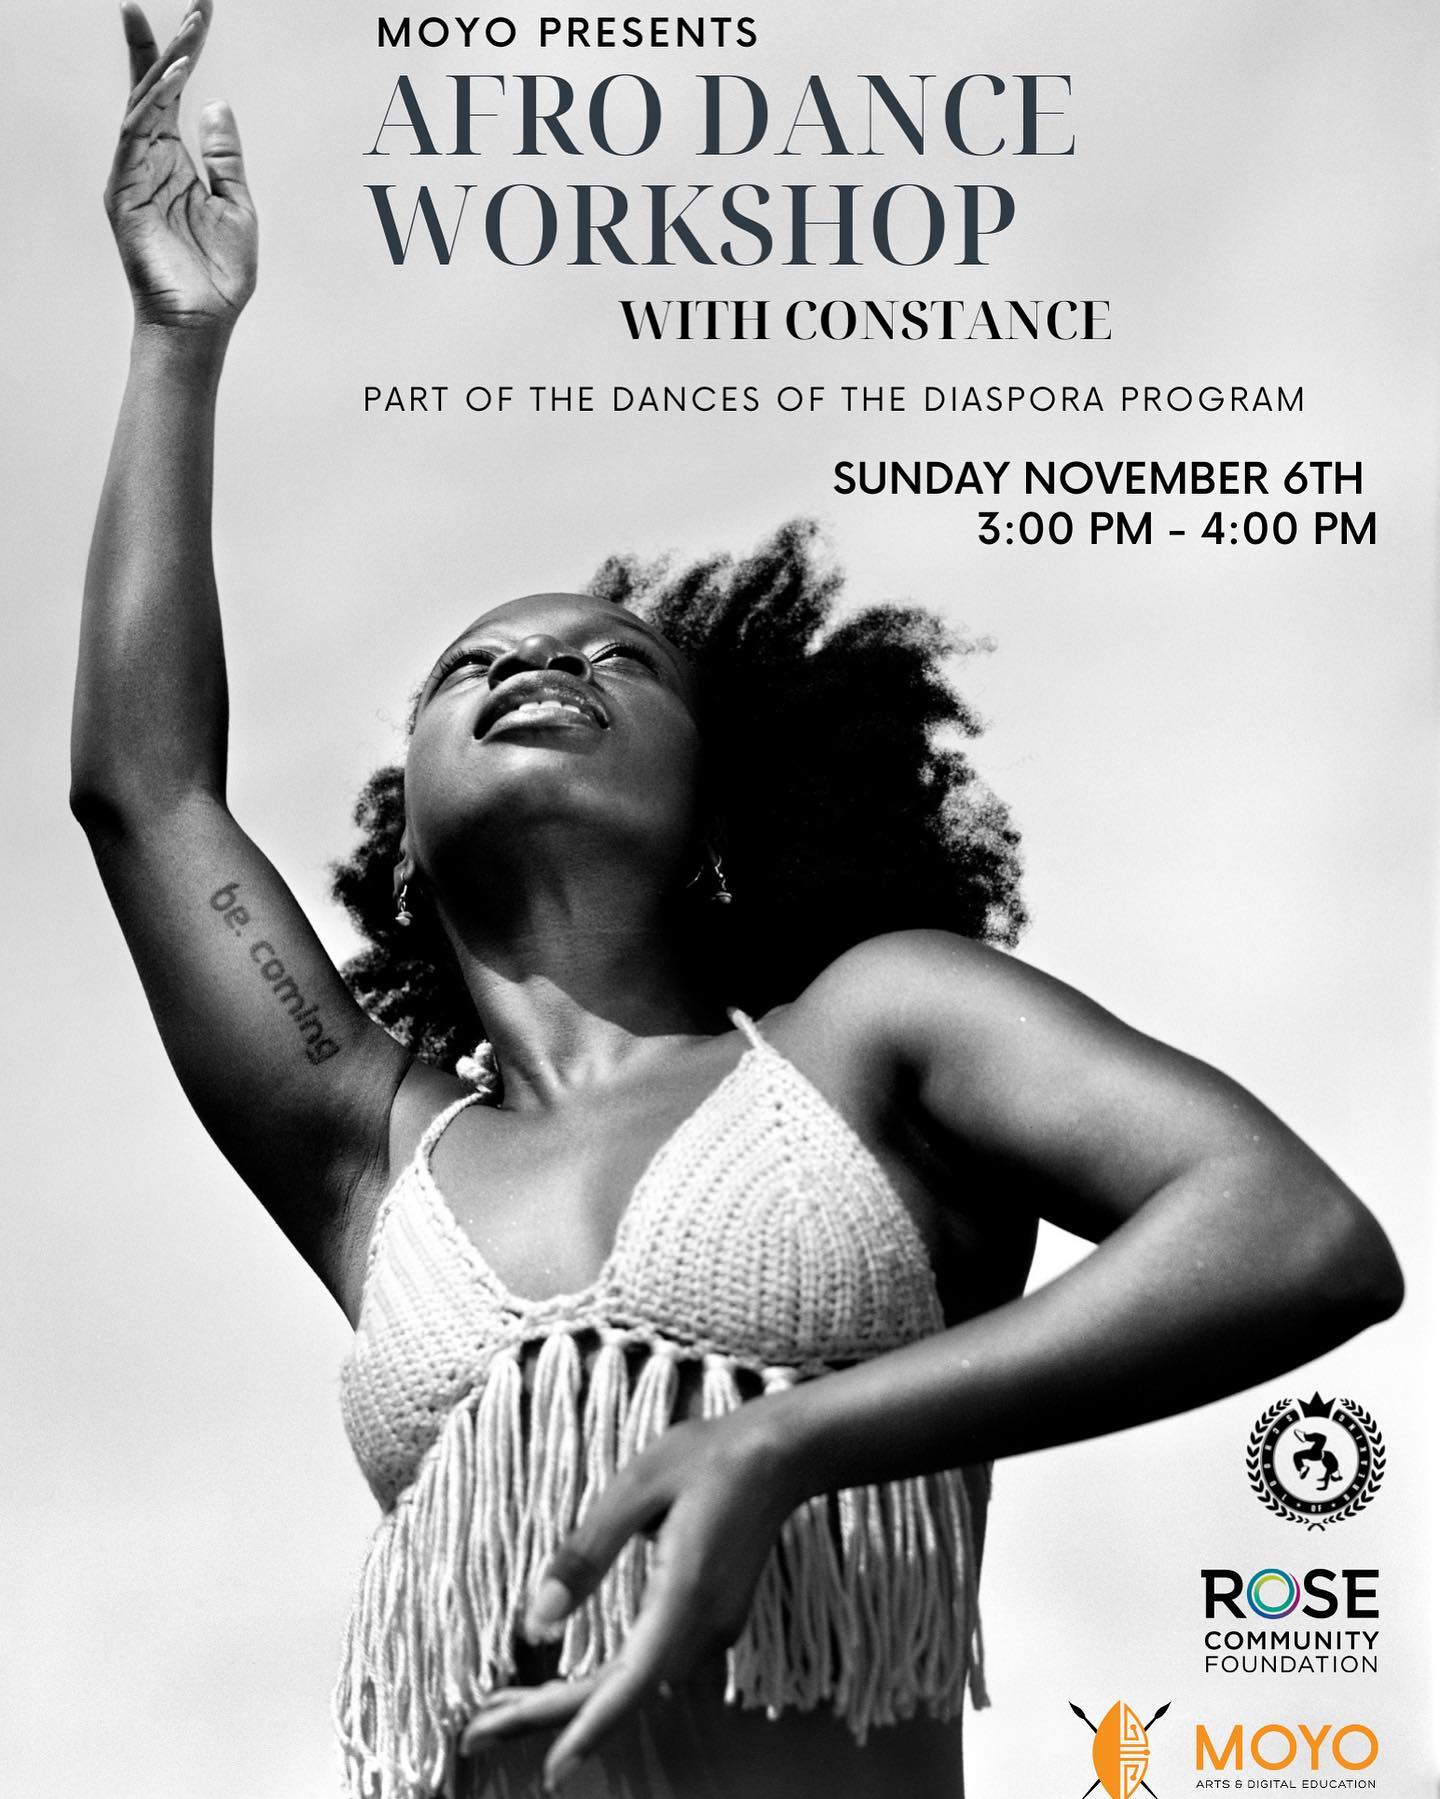 Next up We have a Free workshop this Sunday 🙌🙌

Join us and come get your groove on with @danceconstancedance as she will be teaching a Afro Dance workshop 💯

To sign up for this free workshop link in bio! 

💥Workshop: Afro Dance
💥Date: Sunday, November 6, 2022
💥Time: 3:00pm - 4:00pm
💥Price: Free

💥Location: School of Breaking
  14190 E Jewell Ave Unit 7, Aurora, CO 80012

@moyocac @rcfdenver #schoolofbreaking #free #workshop #dance #afrodance #expressfreely #peace #love #unity #havingfun #hiphop #streetdance #culture